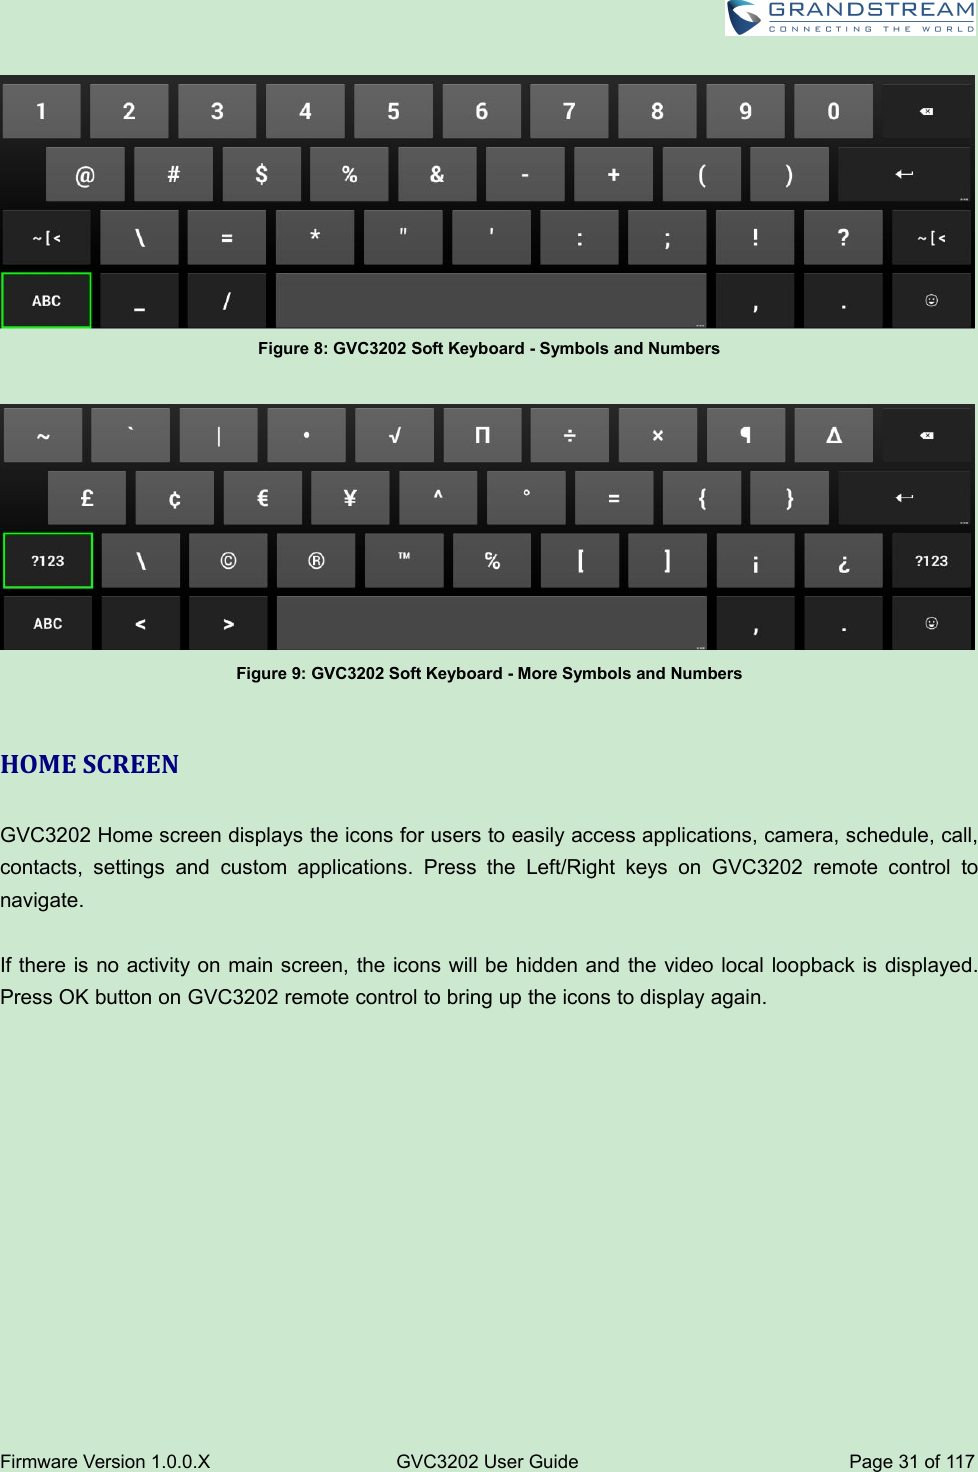 Firmware Version 1.0.0.XGVC3202 User GuidePage 31 of 117Figure 8: GVC3202 Soft Keyboard - Symbols and NumbersFigure 9: GVC3202 Soft Keyboard - More Symbols and NumbersHOME SCREENGVC3202 Home screen displays the icons for users to easily access applications, camera, schedule, call,contacts, settings and custom applications. Press the Left/Right keys on GVC3202 remote control tonavigate.If there is no activity on main screen, the icons will be hidden and the video local loopback is displayed.Press OK button on GVC3202 remote control to bring up the icons to display again.